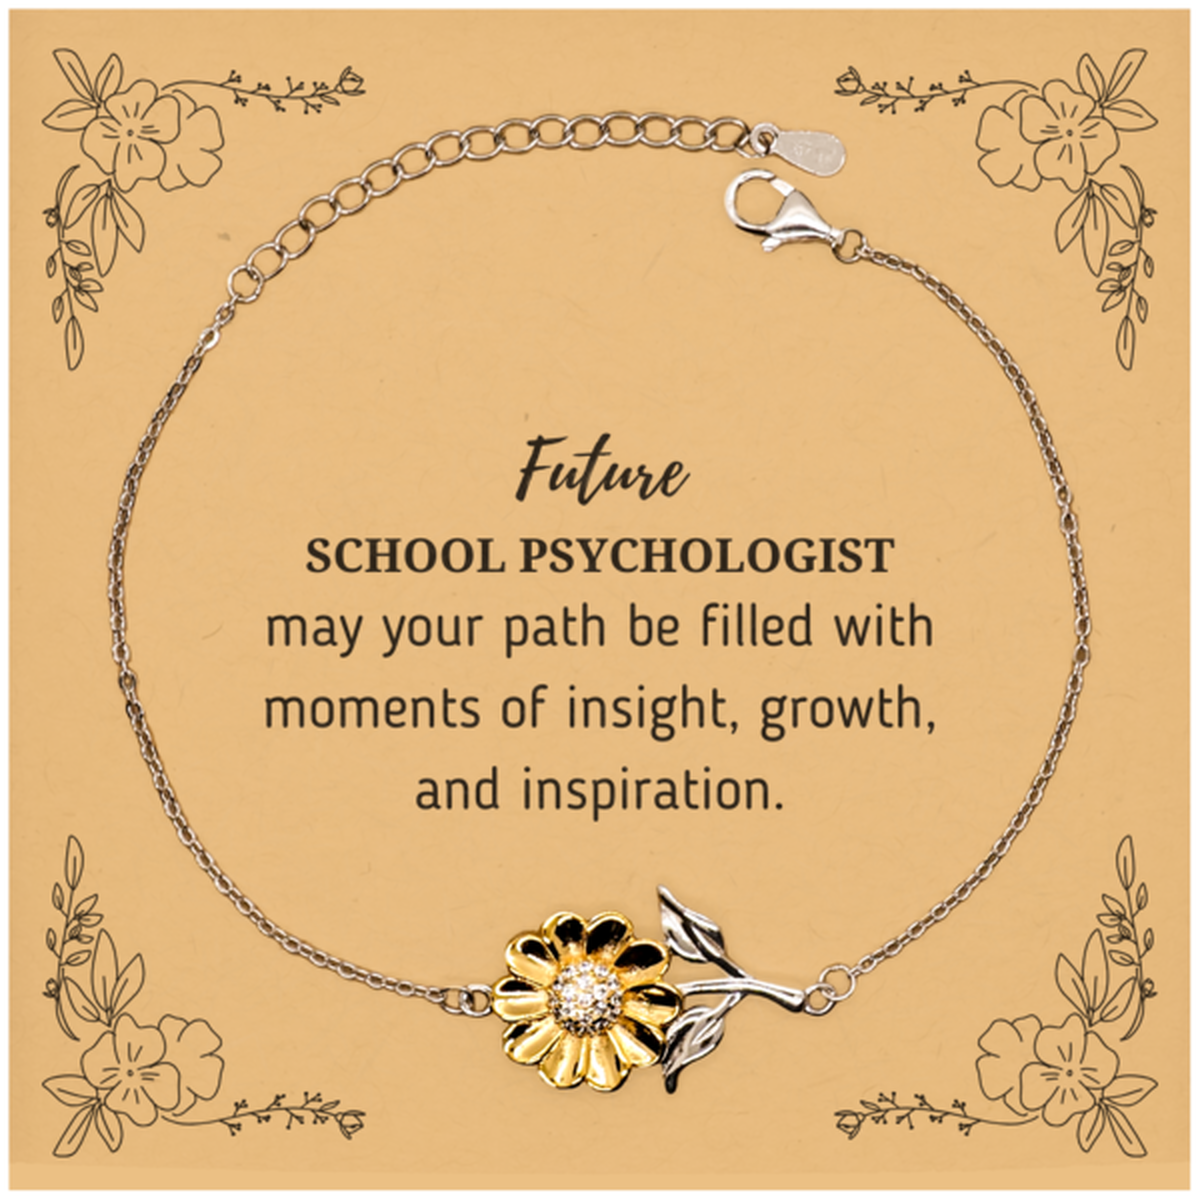 Future School Psychologist Gifts, May your path be filled with moments of insight, Graduation Gifts for New School Psychologist, Christmas Unique Sunflower Bracelet For Men, Women, Friends